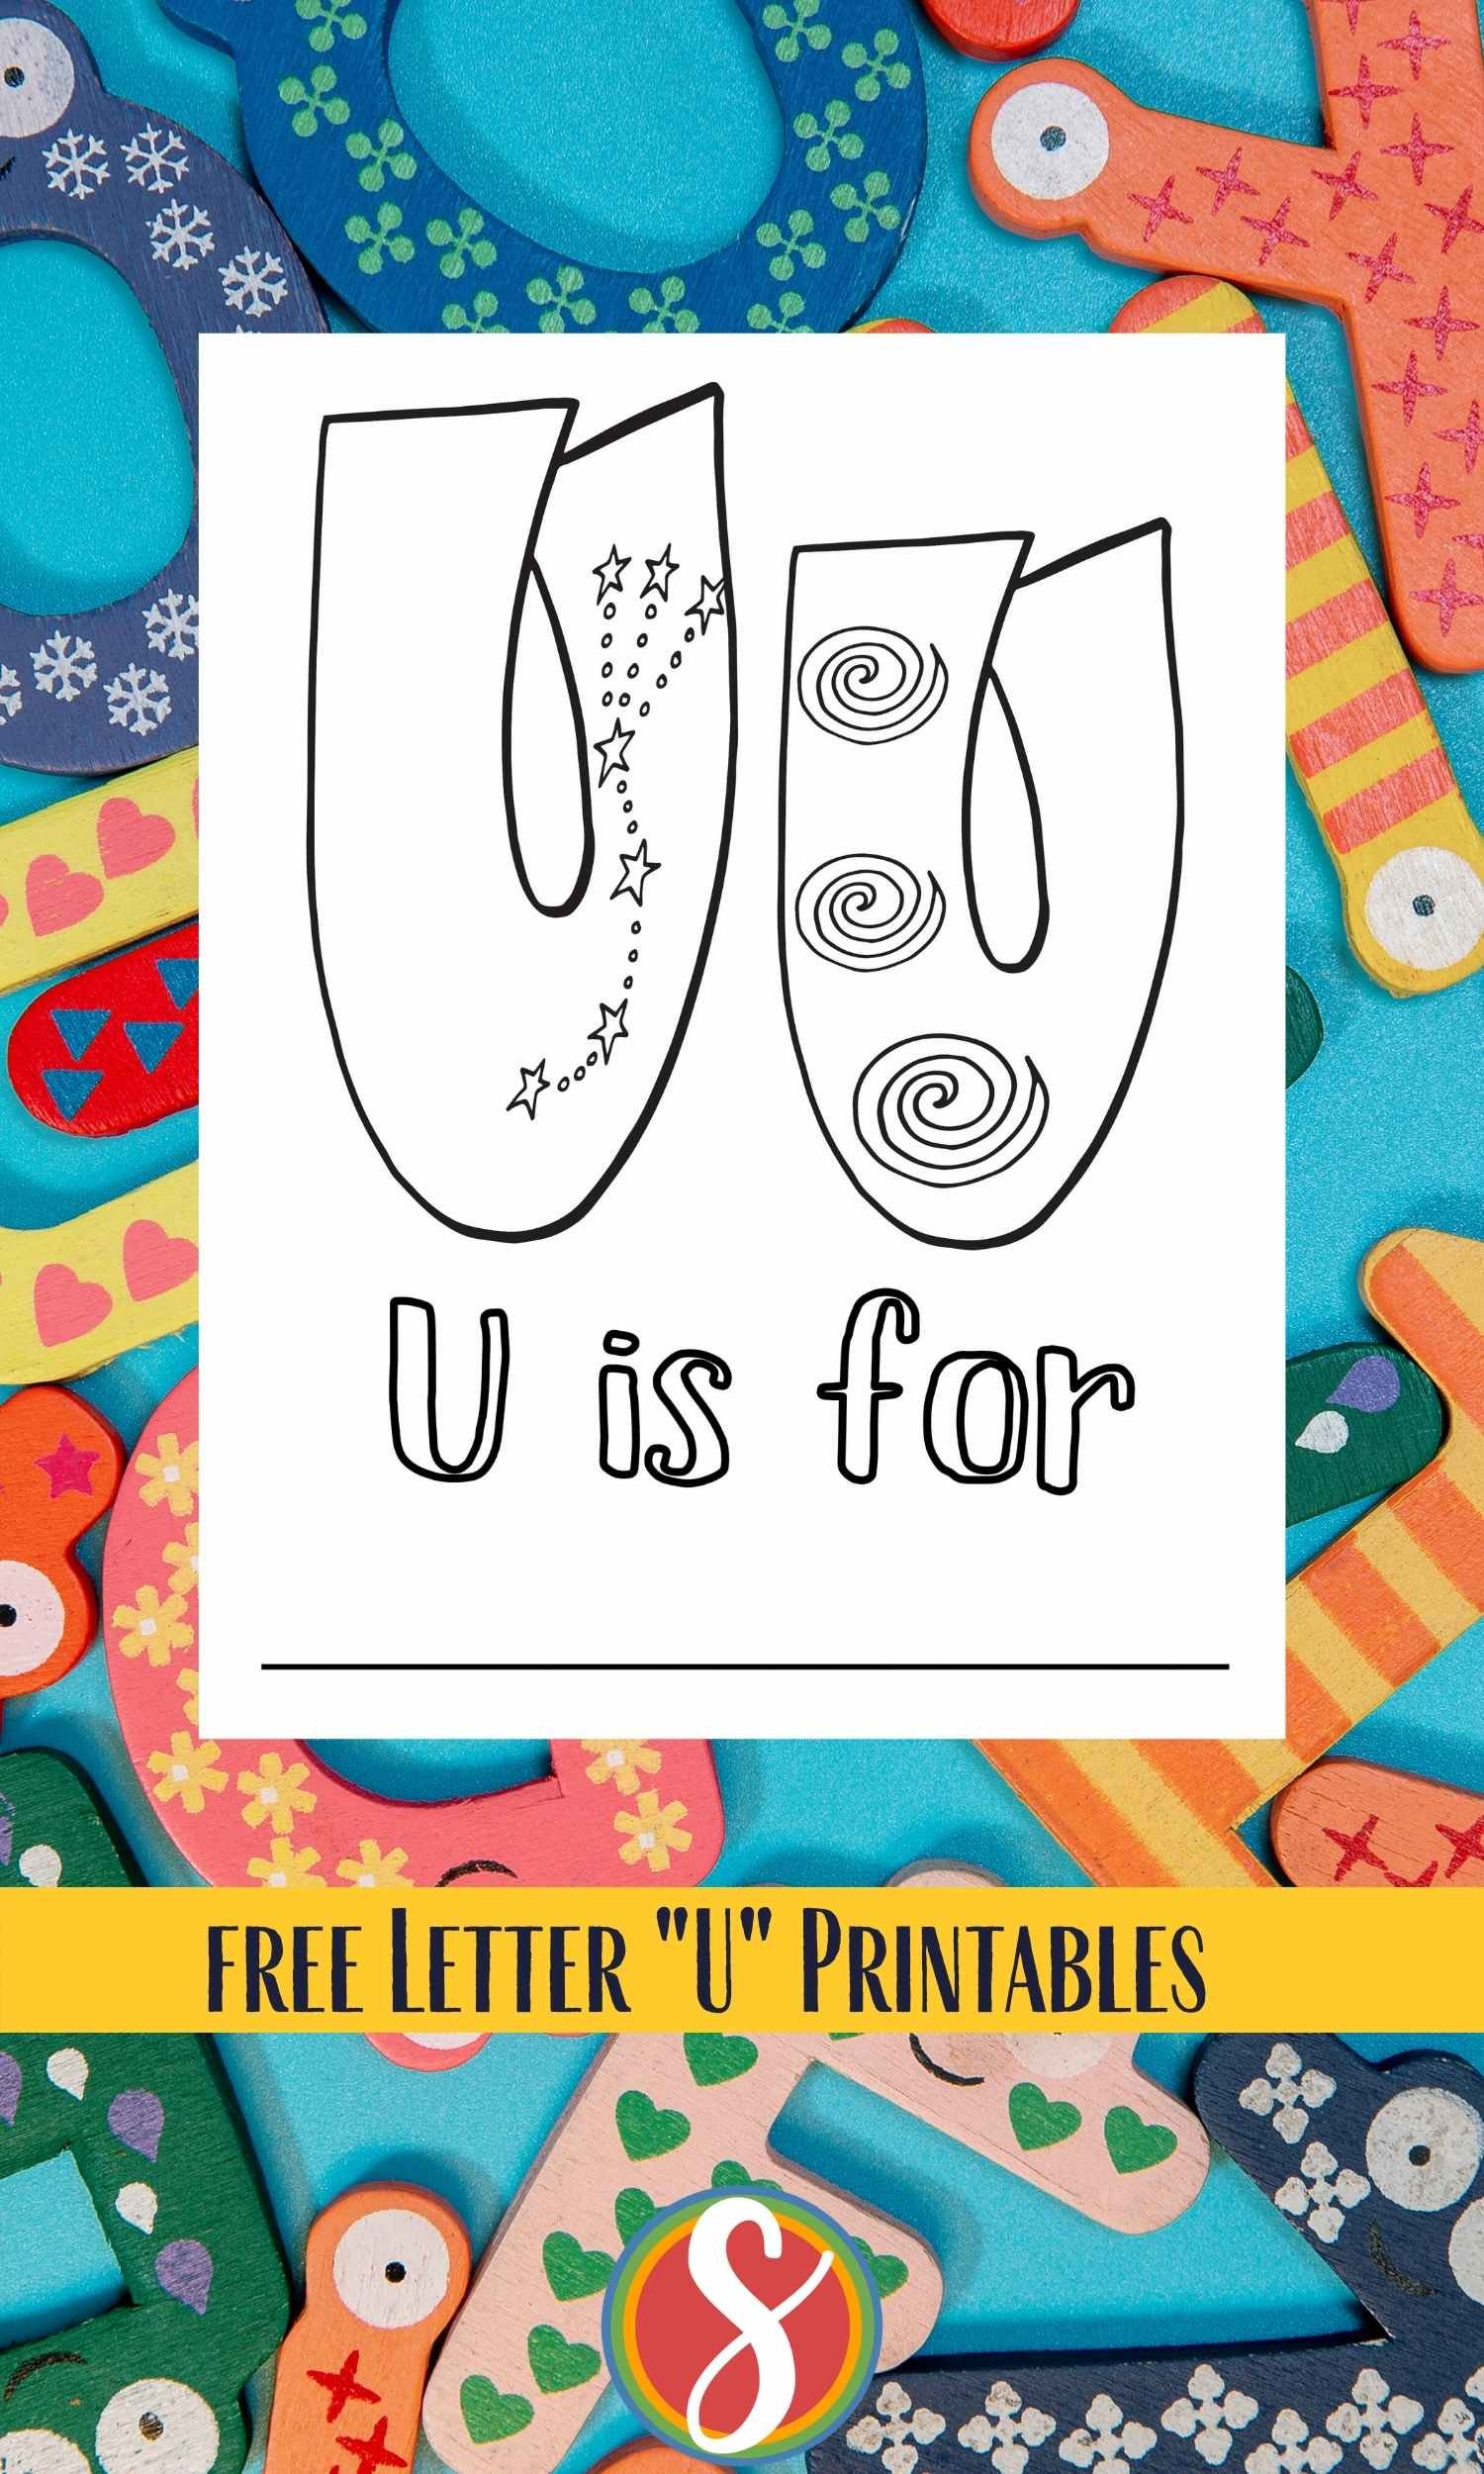 Bubble letters "Uu" with stars and swirly doodles inside